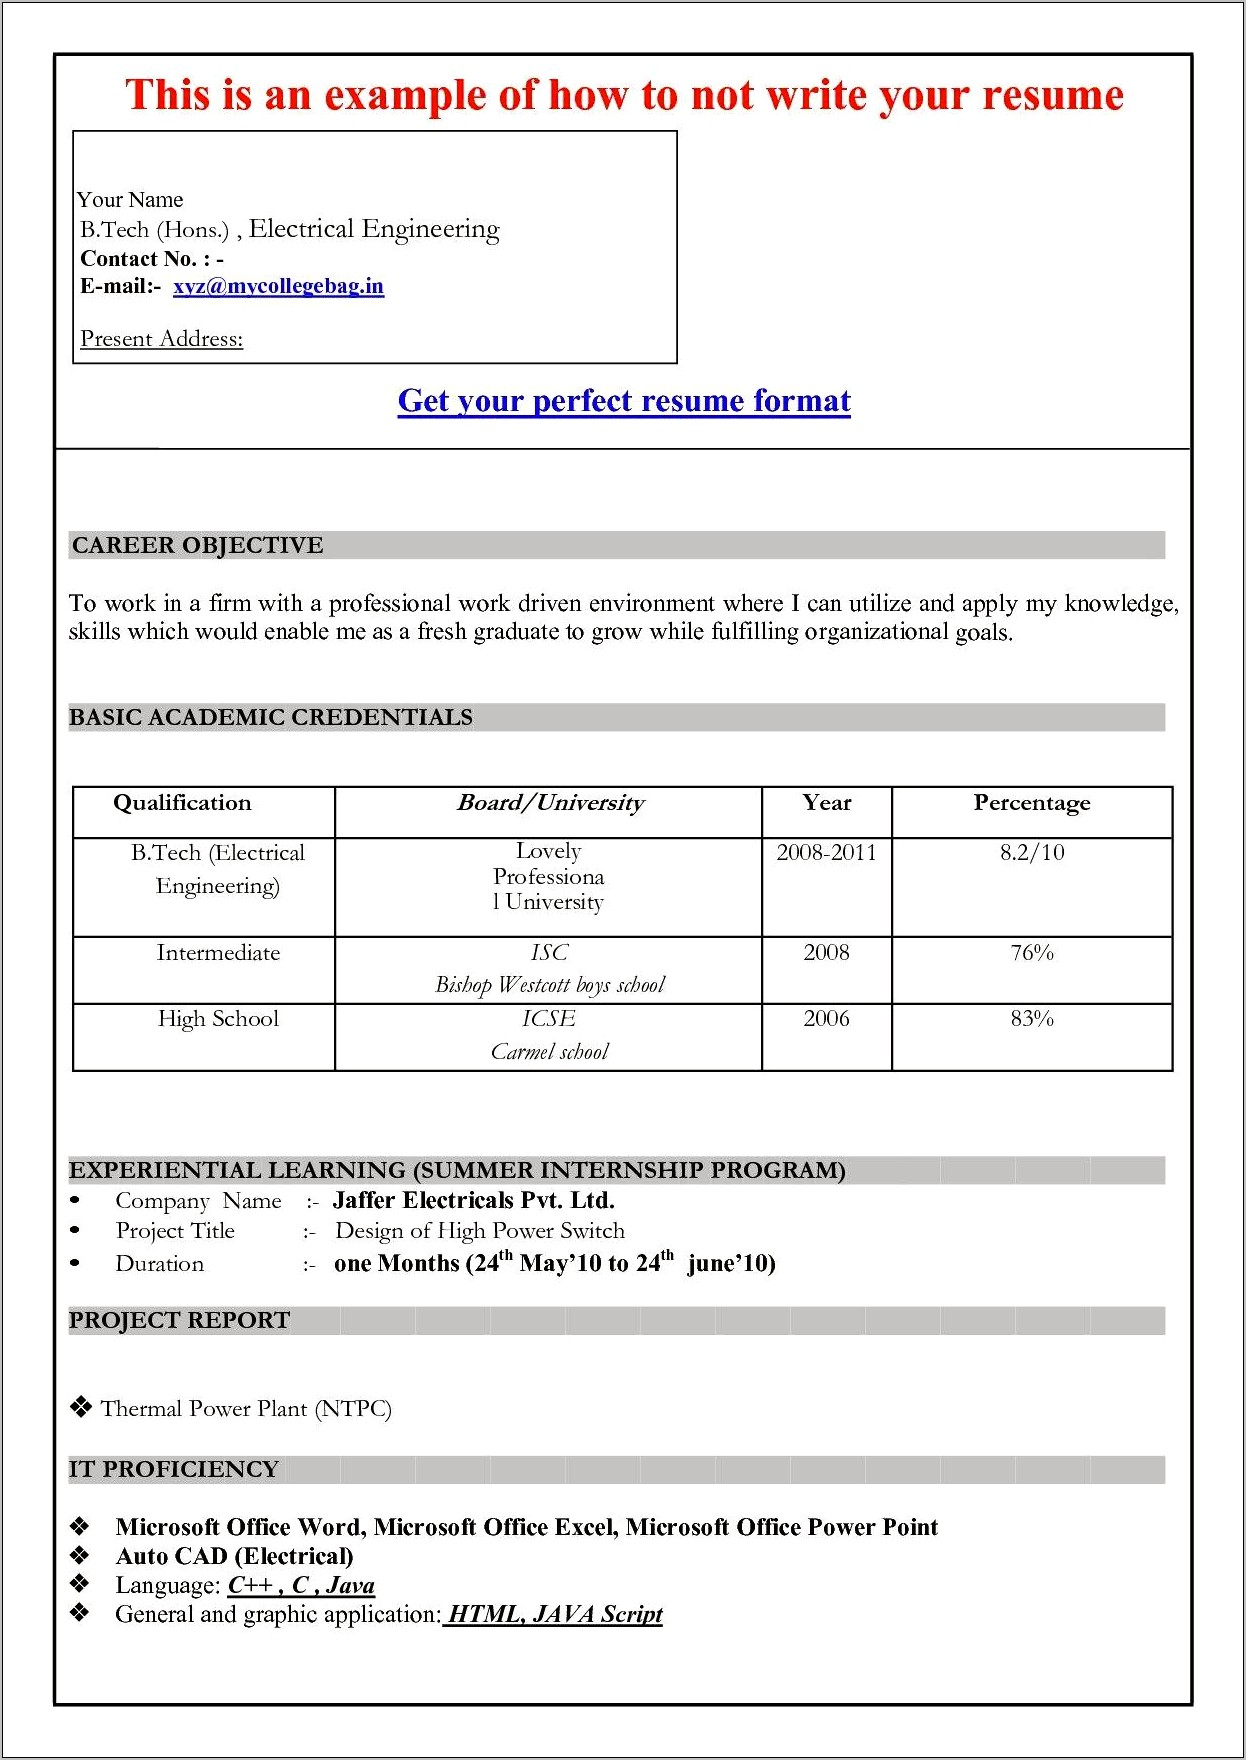 Resume Format For Freshers In Microsoft Word 2007